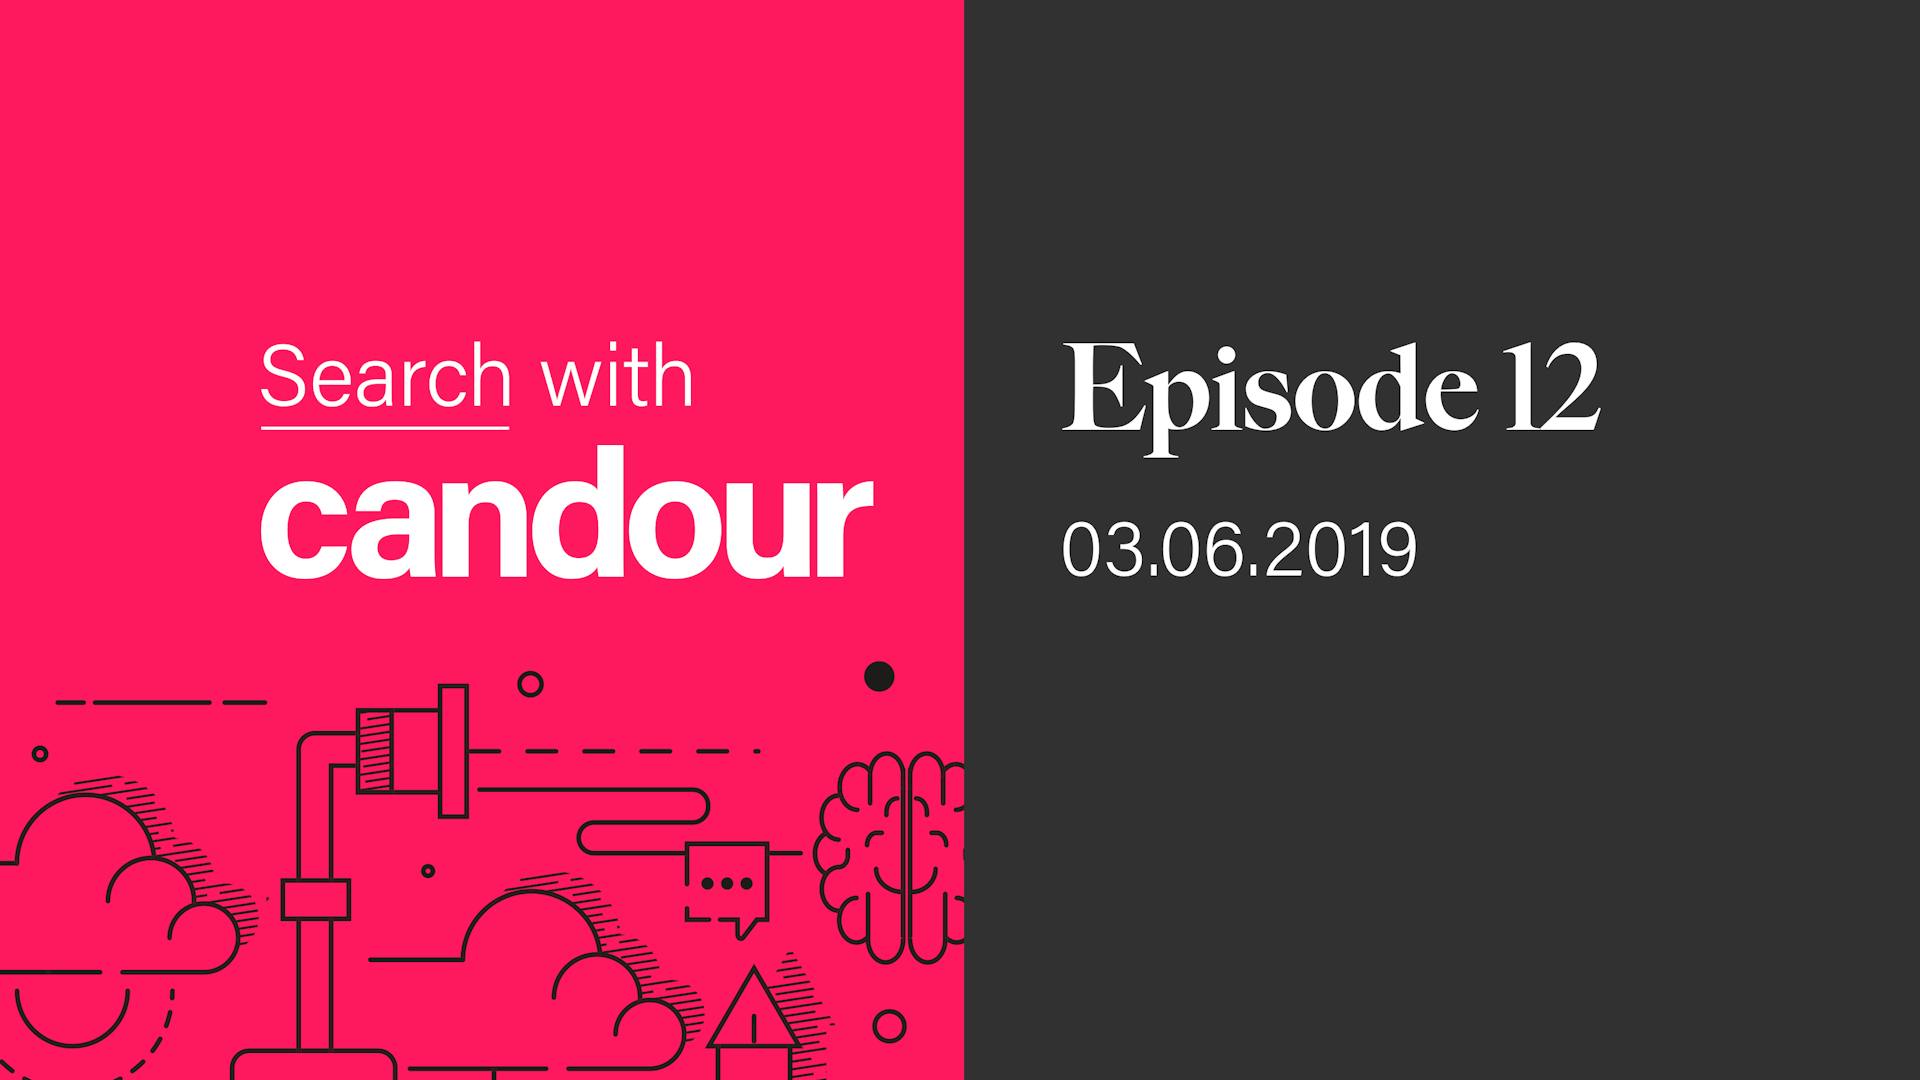 Search with Candour podcast - Episode 12